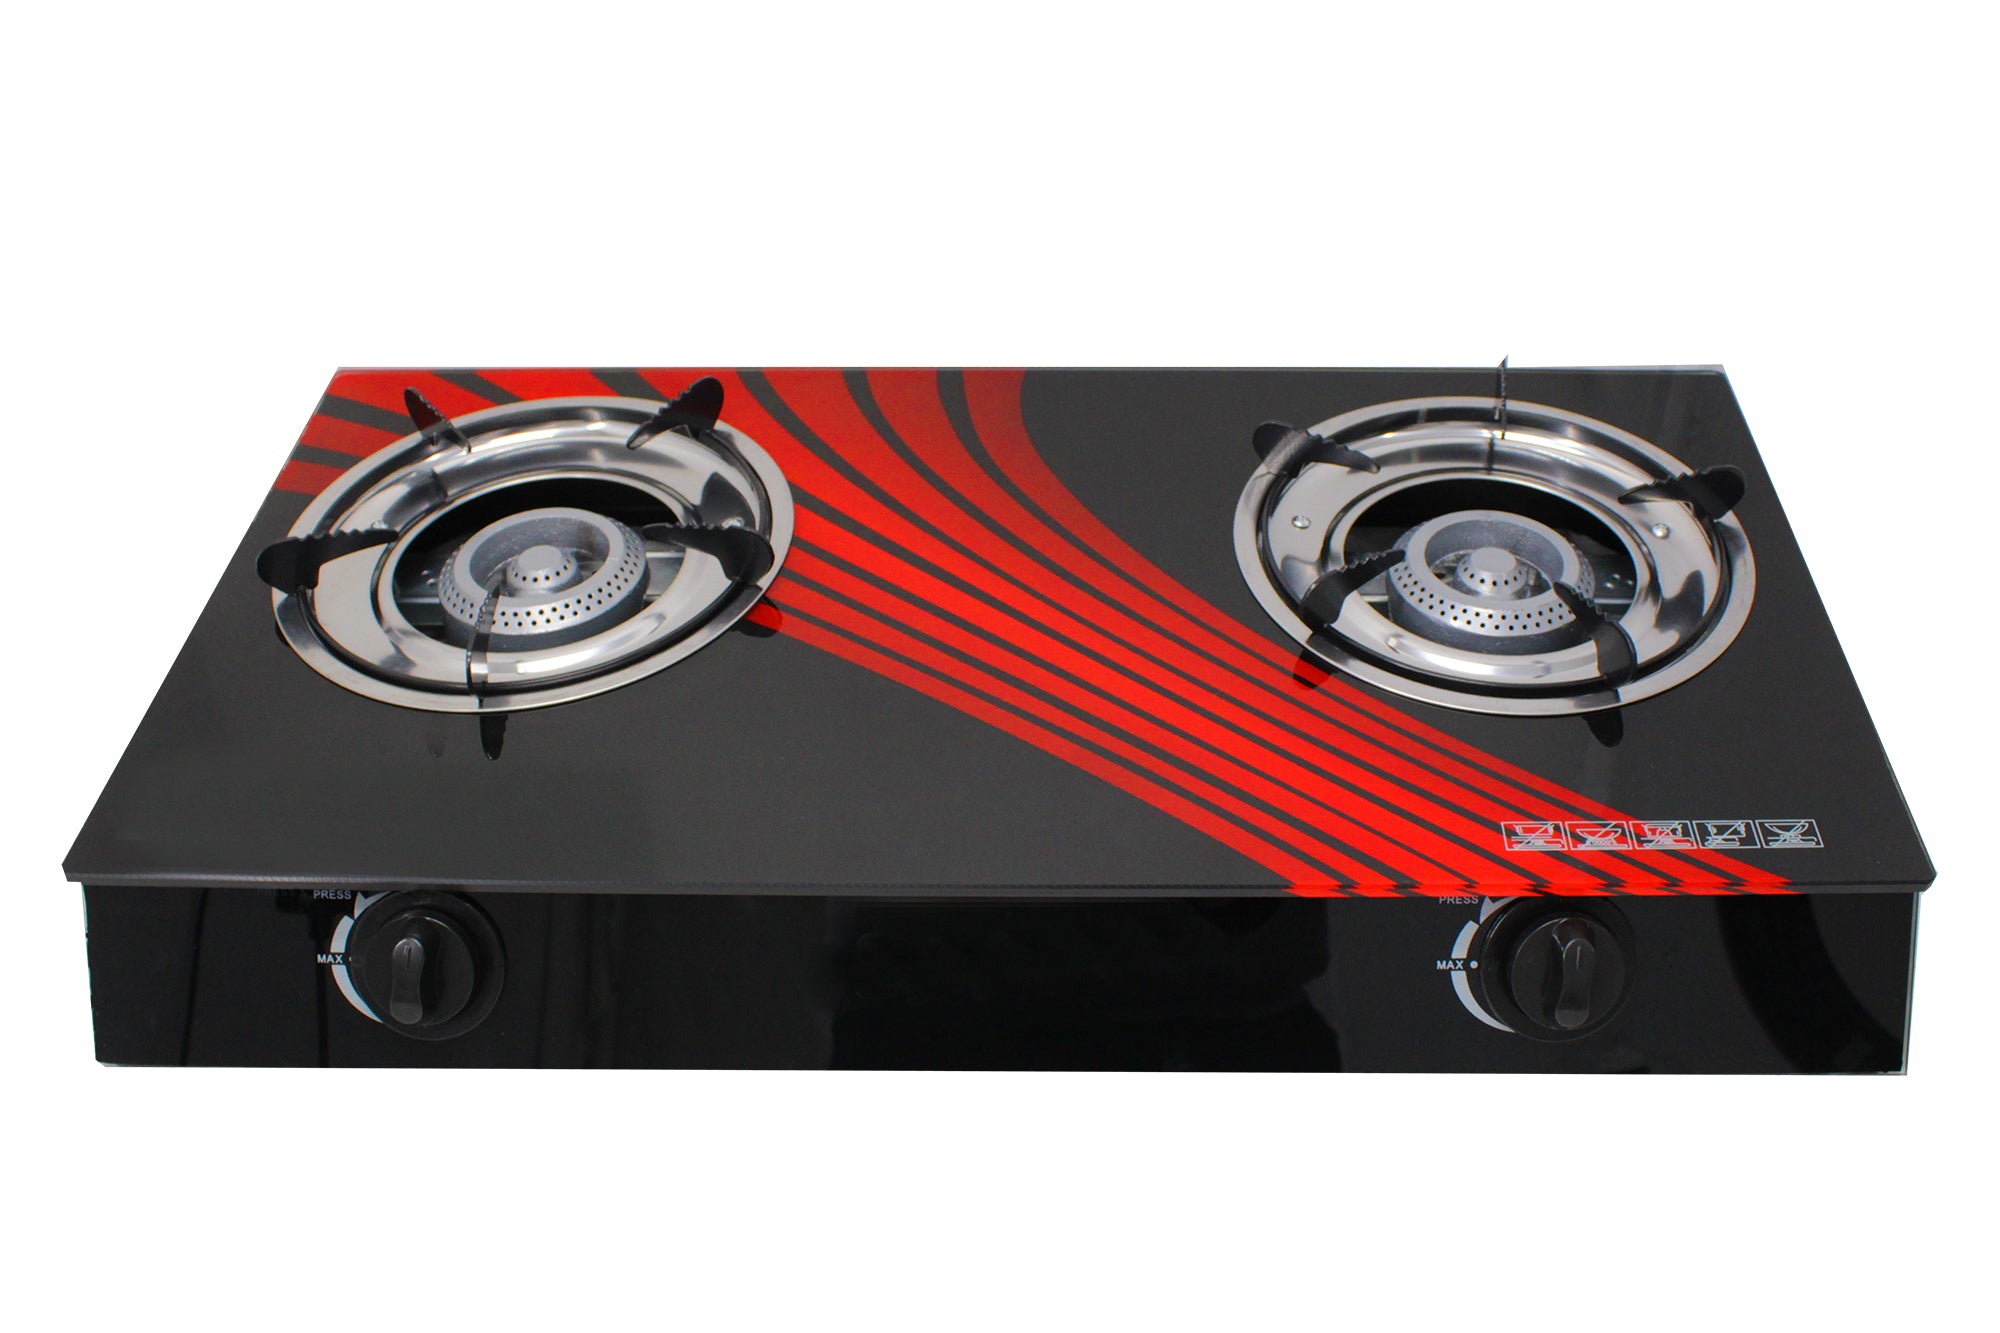 Two-Burner Auto-Ignition Tempered Glass Panel Gas Stove - Red Stripes